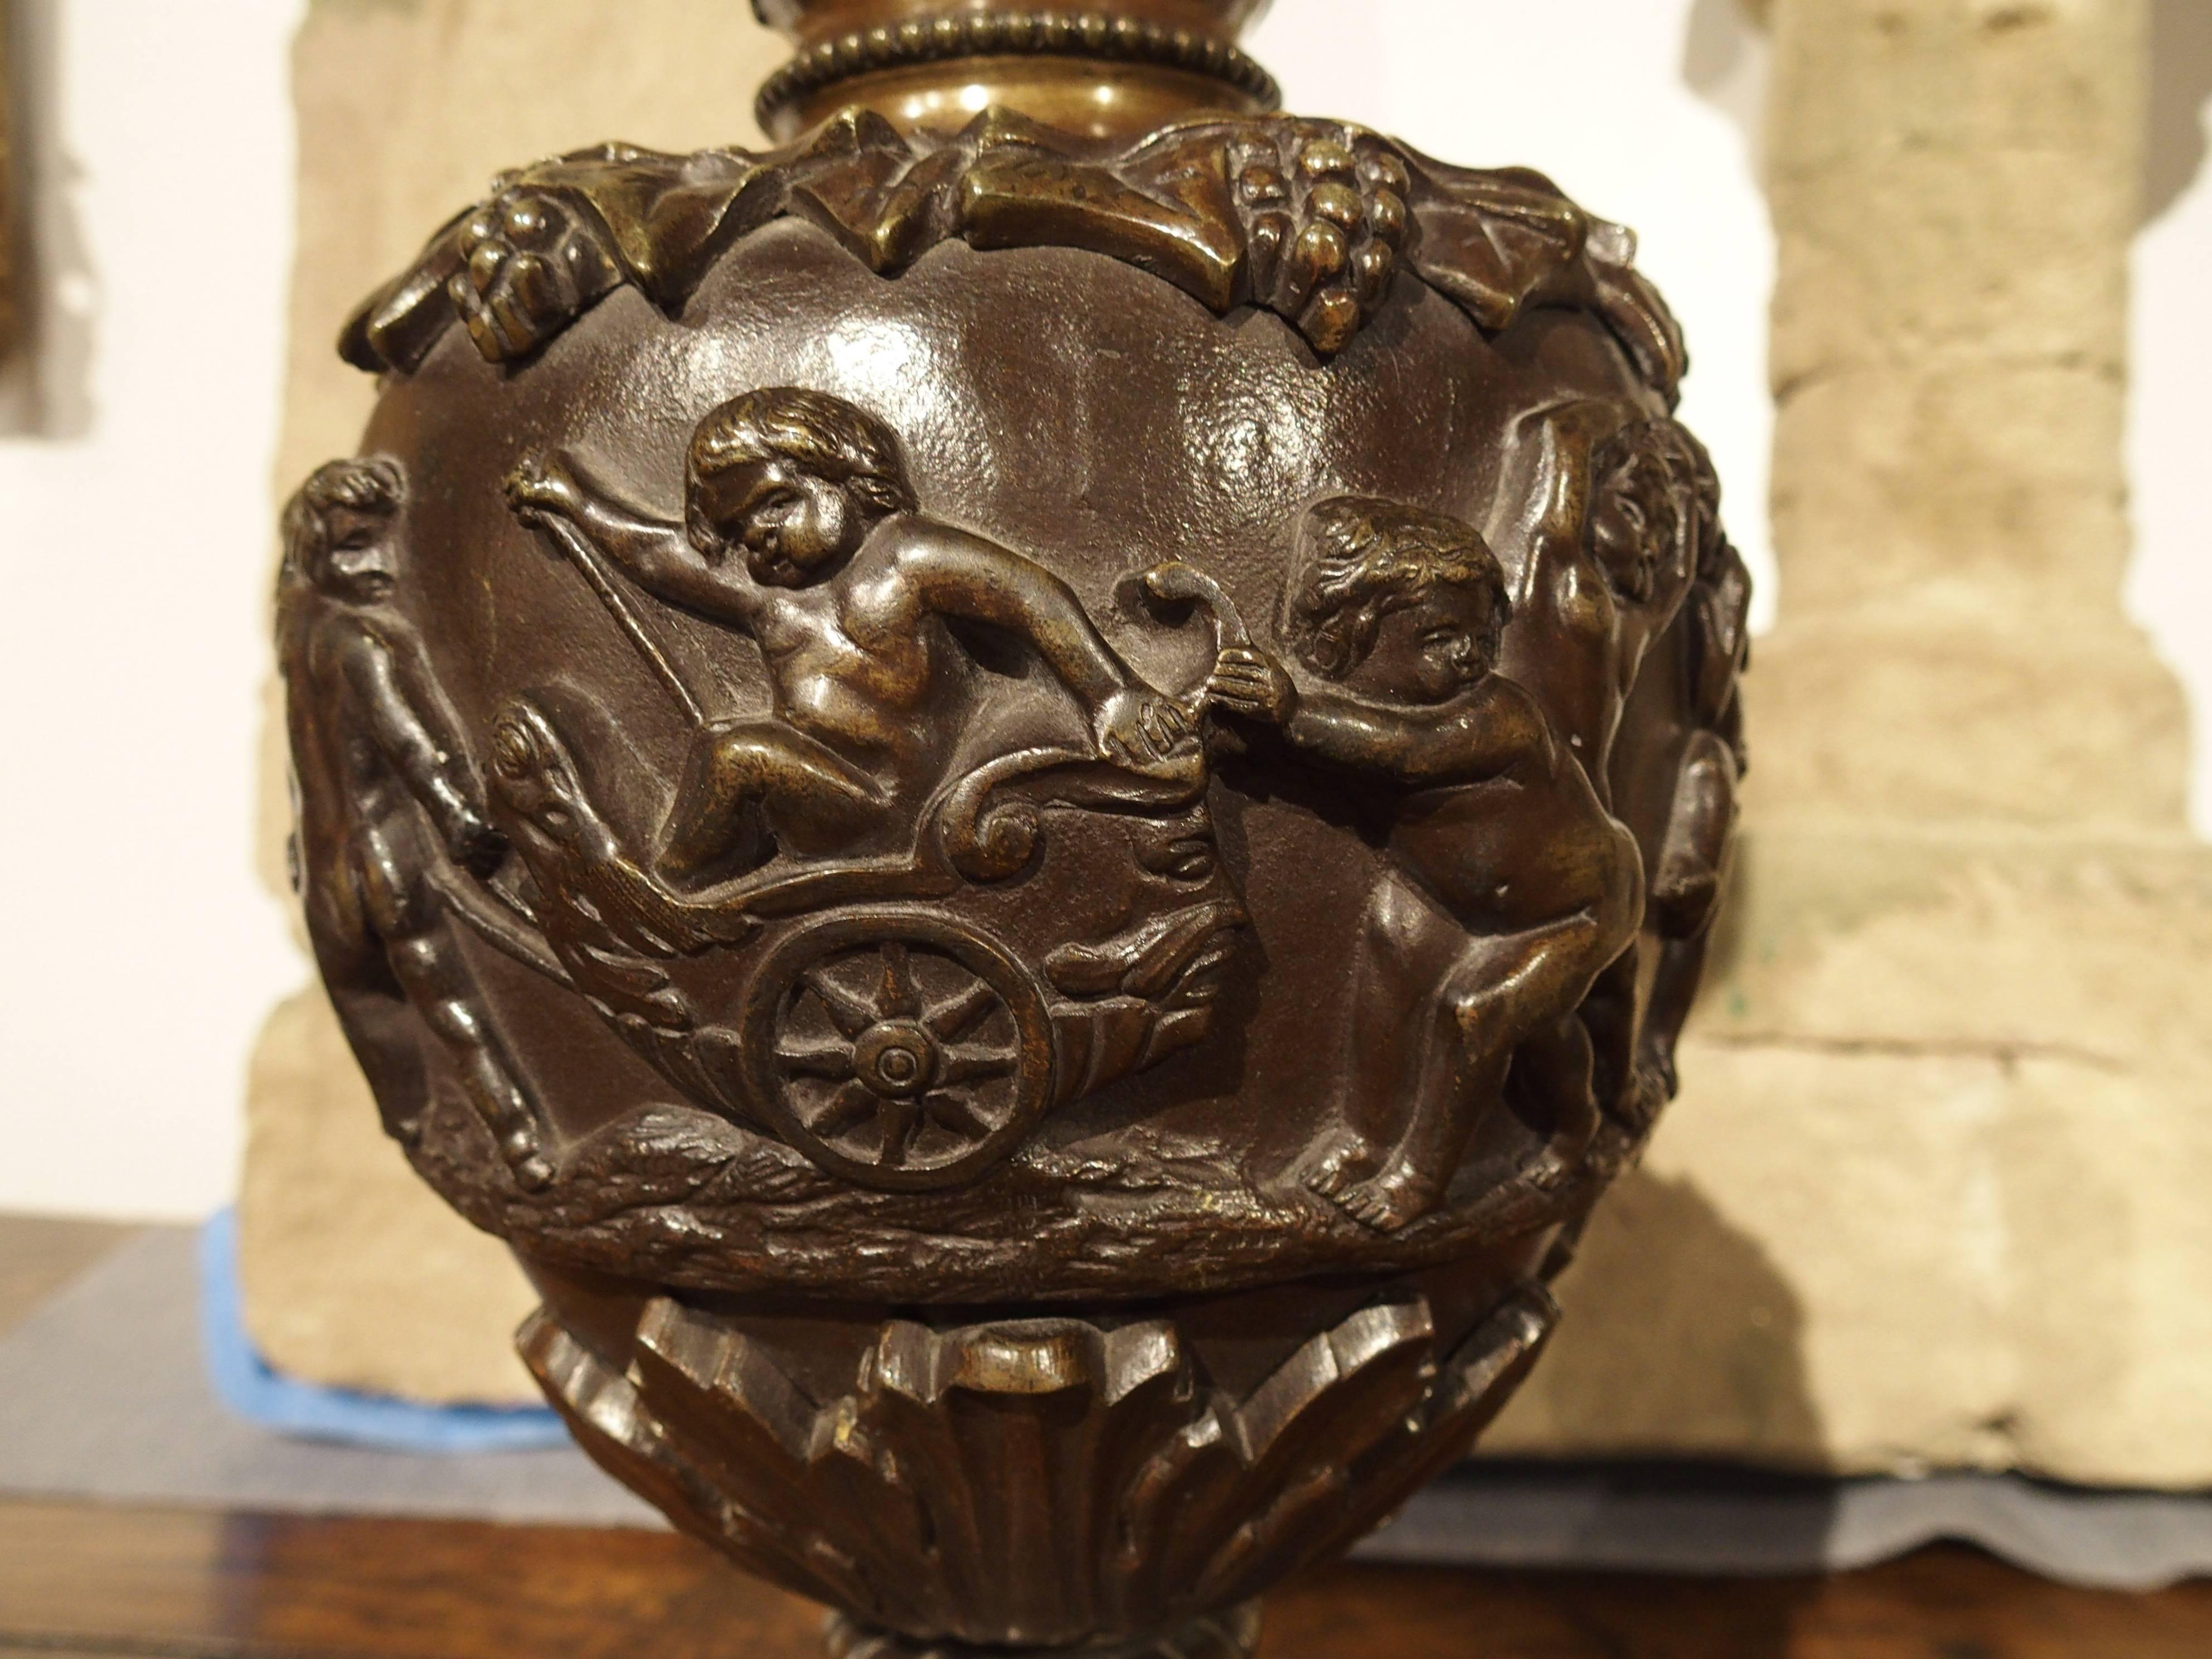 These Renaissance style antique French patinated bronze ewers depict very busy and mischievous Bacchanalian putti at play. A cherub sits atop the handle holding an item in his hands. The musicians are putti with horns, drums and possibly a flute and